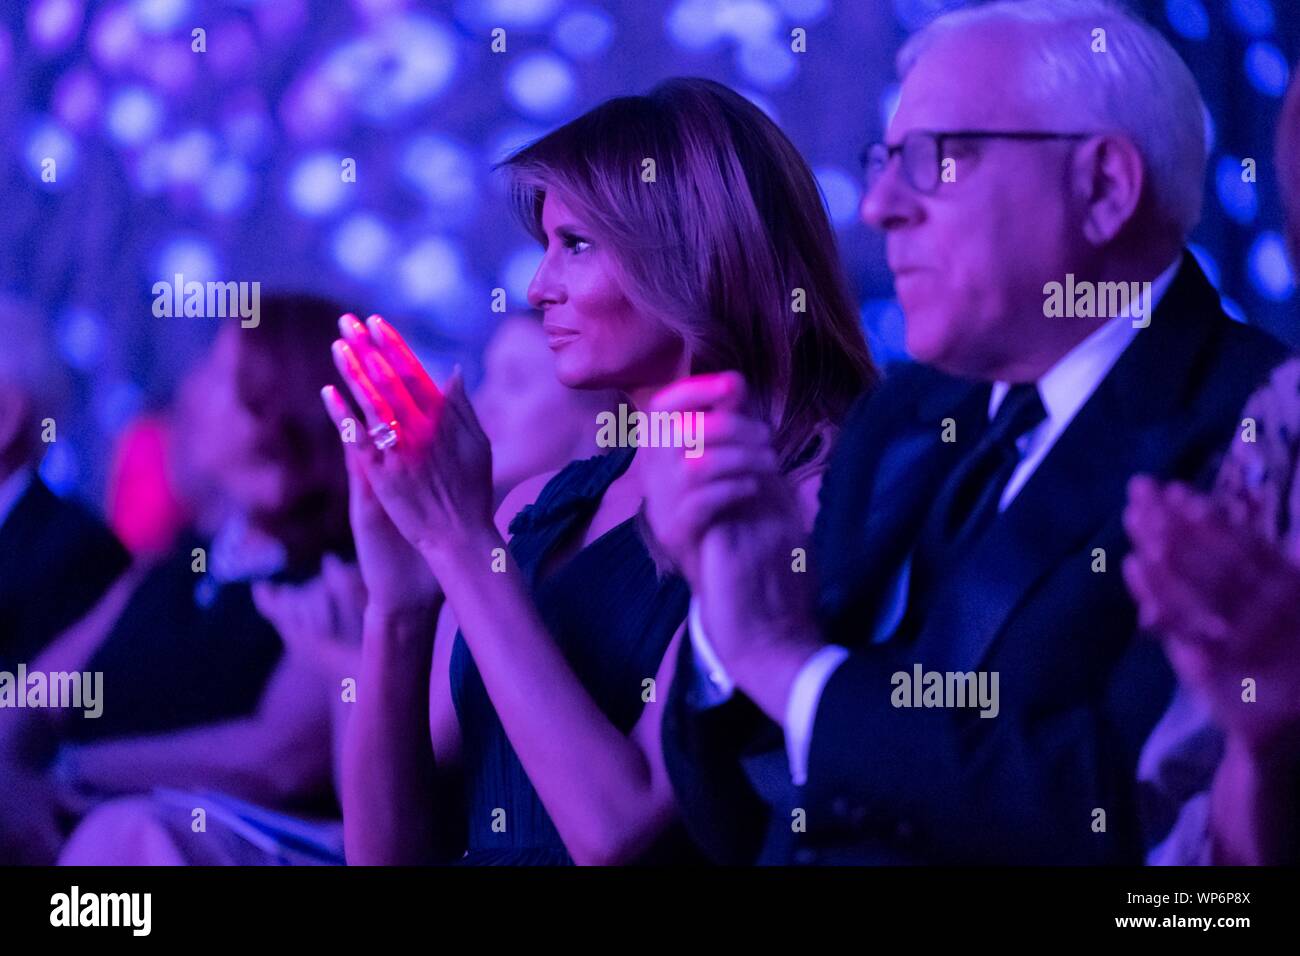 Washington, DC, USA. 05 September, 2019. U.S. First Lady Melania Trump applauds during the REACH performance at the John F. Kennedy Center for the Performing Arts September 5, 2019 in Washington, D.C. Sitting with the First Lady is David Rubenstein, co-founder of the Carlyle Group. Stock Photo